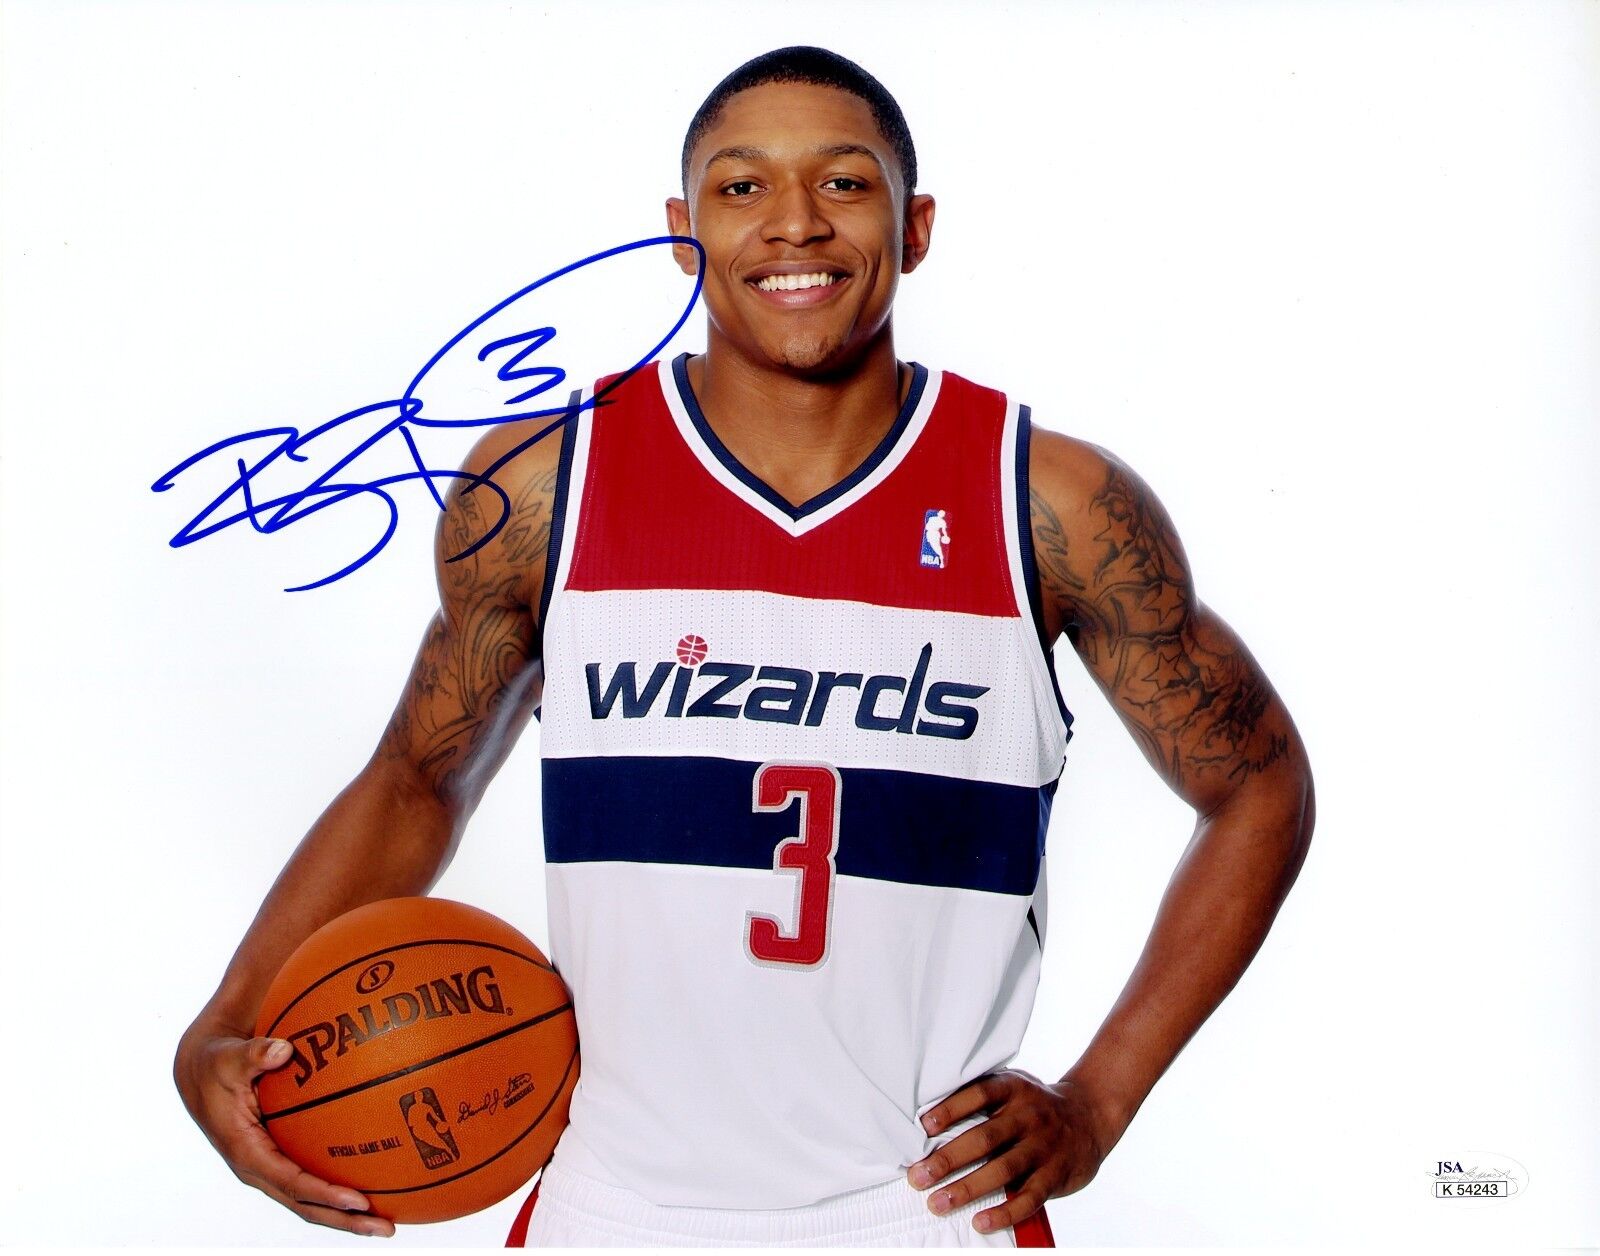 Bradley Beal Signed 11x14 Photo Poster painting JSA COA Rookie RC Auto Autograph Wizards 2012-13